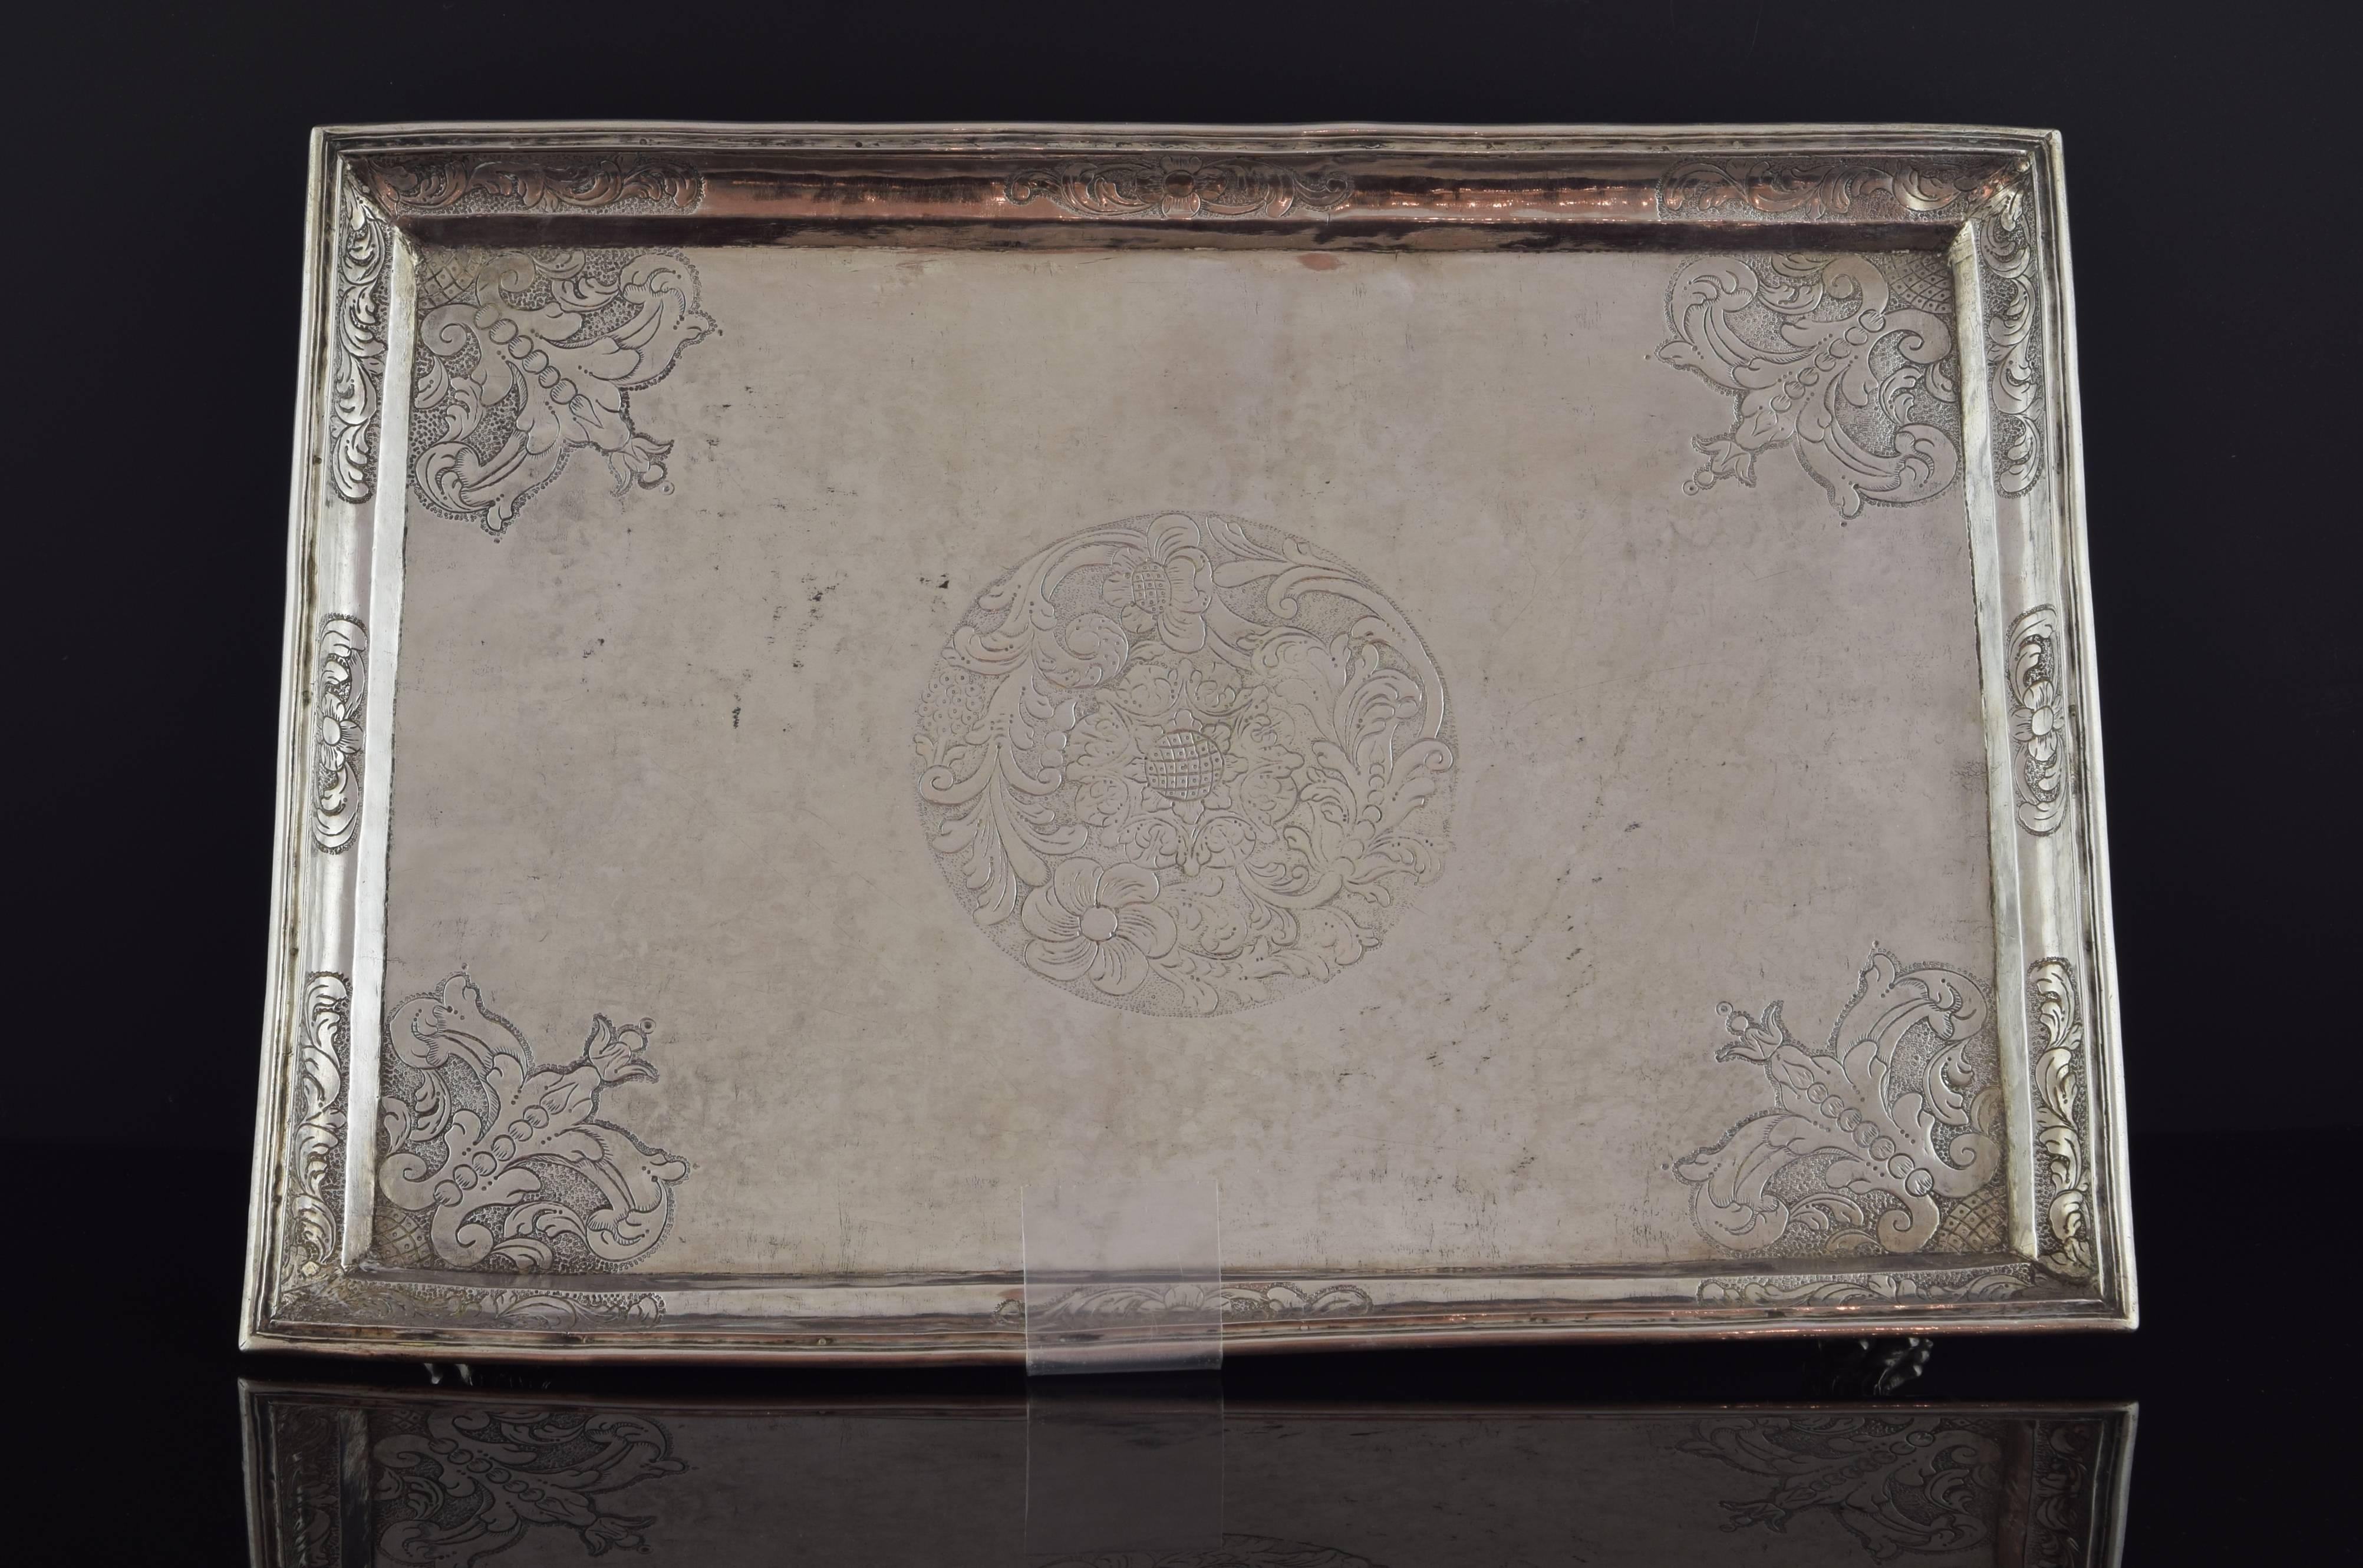 Rectangular solid silver tray raised over four beast claws, with remarkable detail on the skin, nails and anatomy. The upper part has a series of decorative elements engraved: in the center, a circular shape with plant and floral motifs; the corners